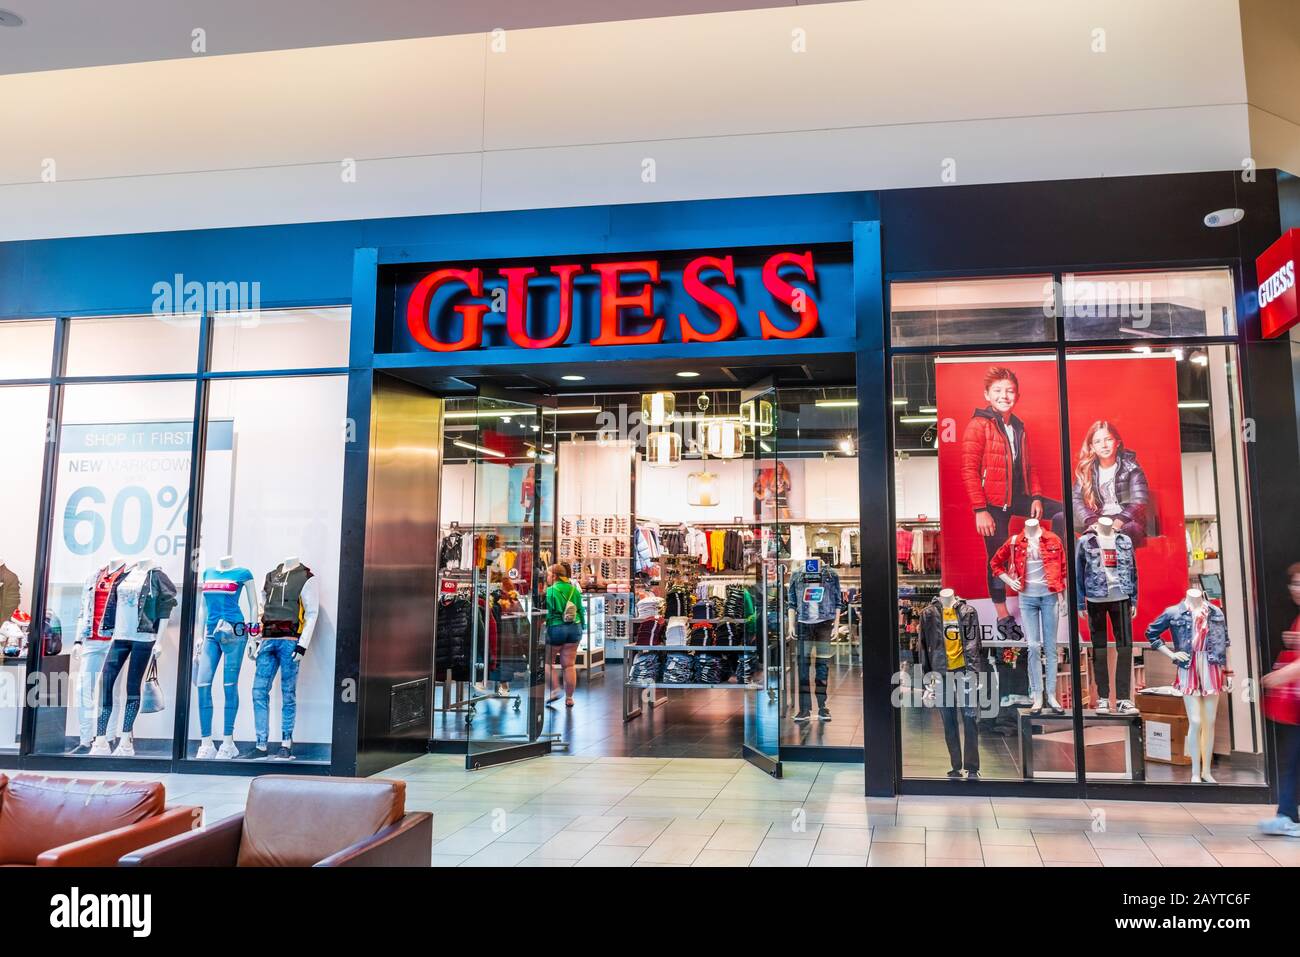 Jan 31, 2020 Milpitas / CA / USA - Guess store in a South San Francisco Bay  area mall; Guess (styled as GUESS or Guess?) is an American clothing brand  Stock Photo - Alamy